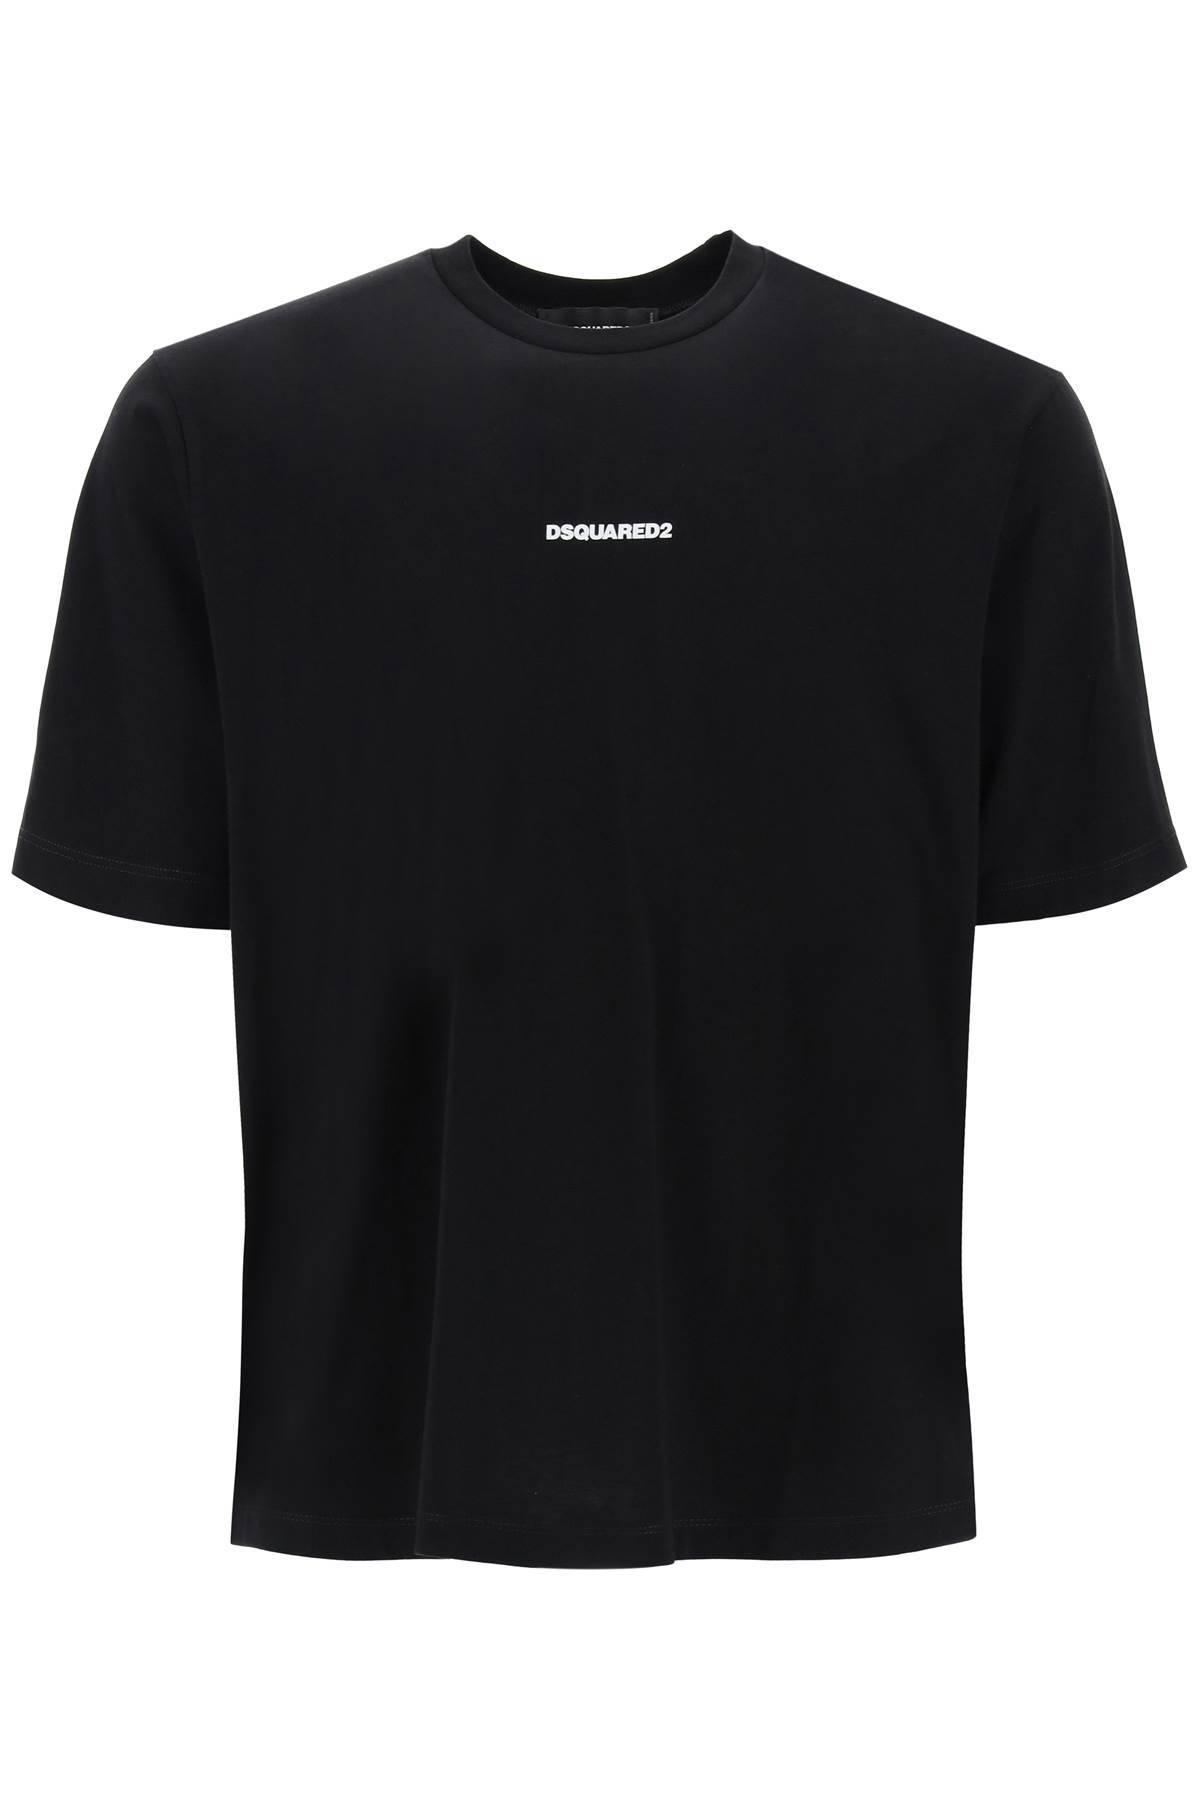 Dsquared2 DSQUARED2 slouch fit t-shirt with logo print